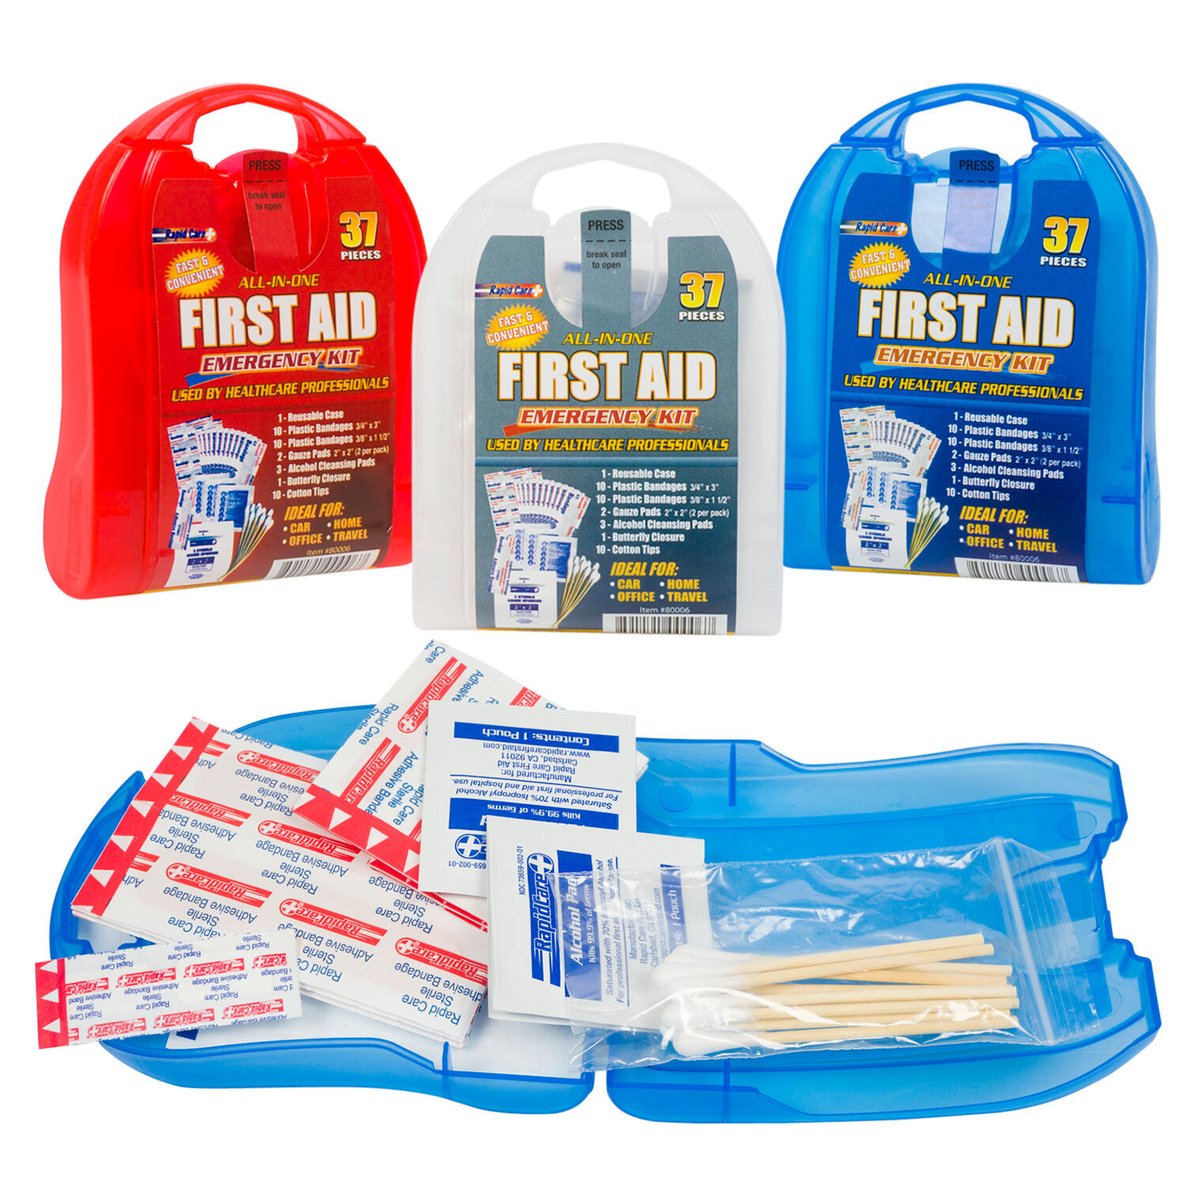 Stock up on First Aid Kits to ensure you and your family's safety in case of an emergency. Bulk pricing available. Only @ 4sgm.com! #Wholesale #FirstAidProducts #PersonalCareProducts #BulkPricing #DealOfTheDay 
bit.ly/3b98cIP